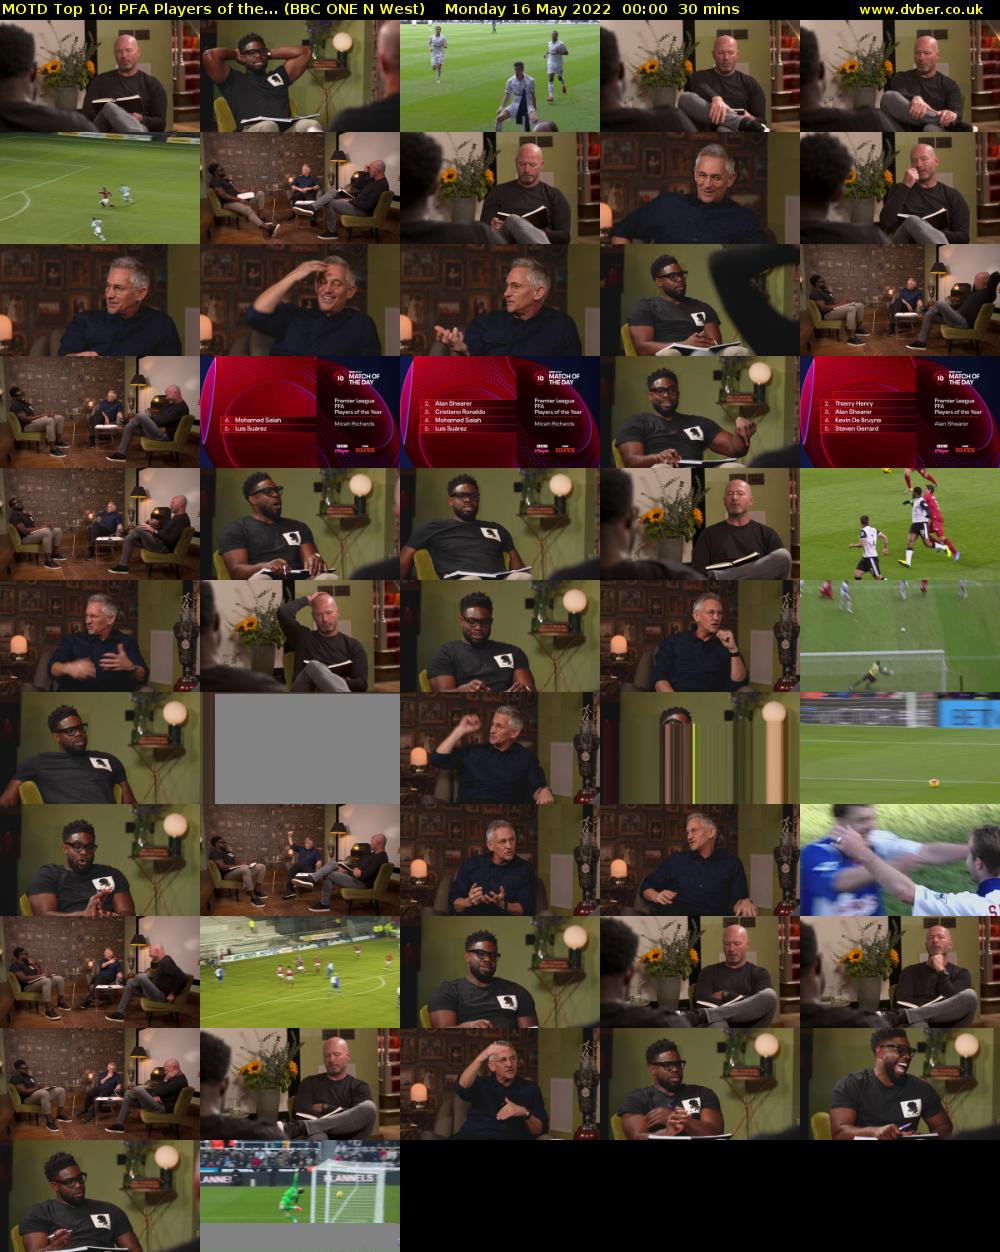 MOTD Top 10: PFA Players of the... (BBC ONE N West) Monday 16 May 2022 00:00 - 00:30